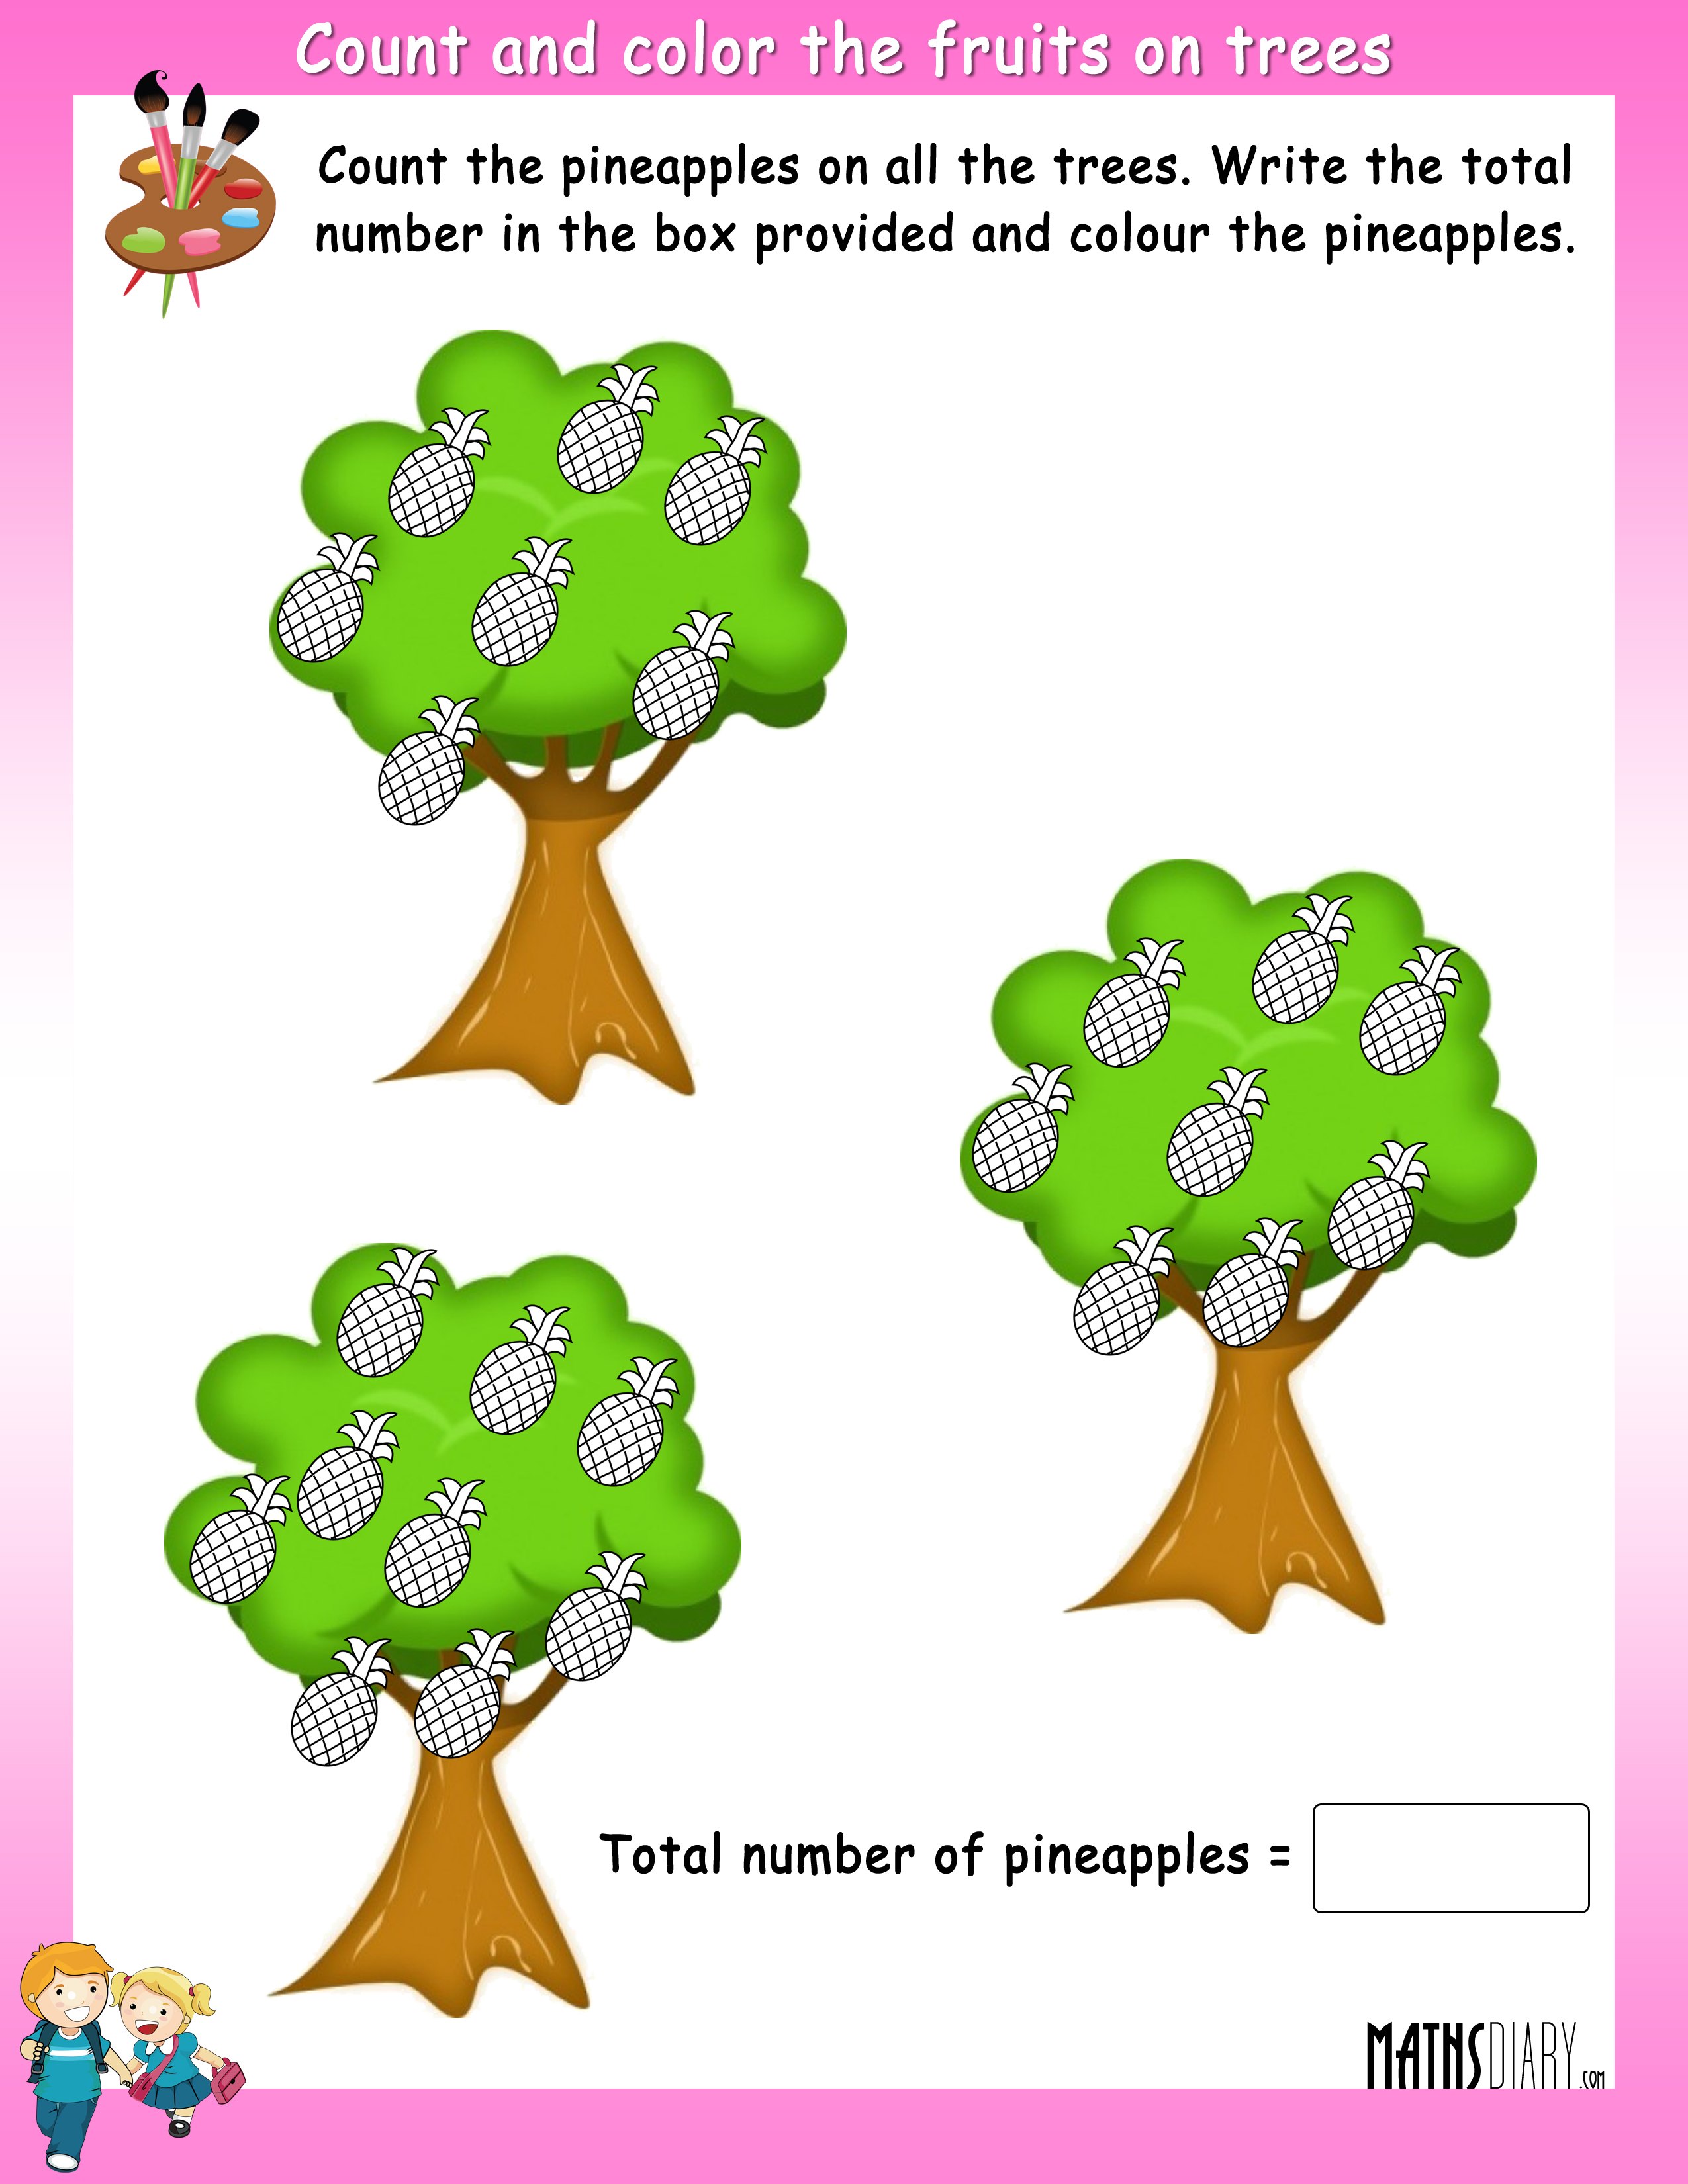 Count And Color The Fruits On Trees Math Worksheets MathsDiary